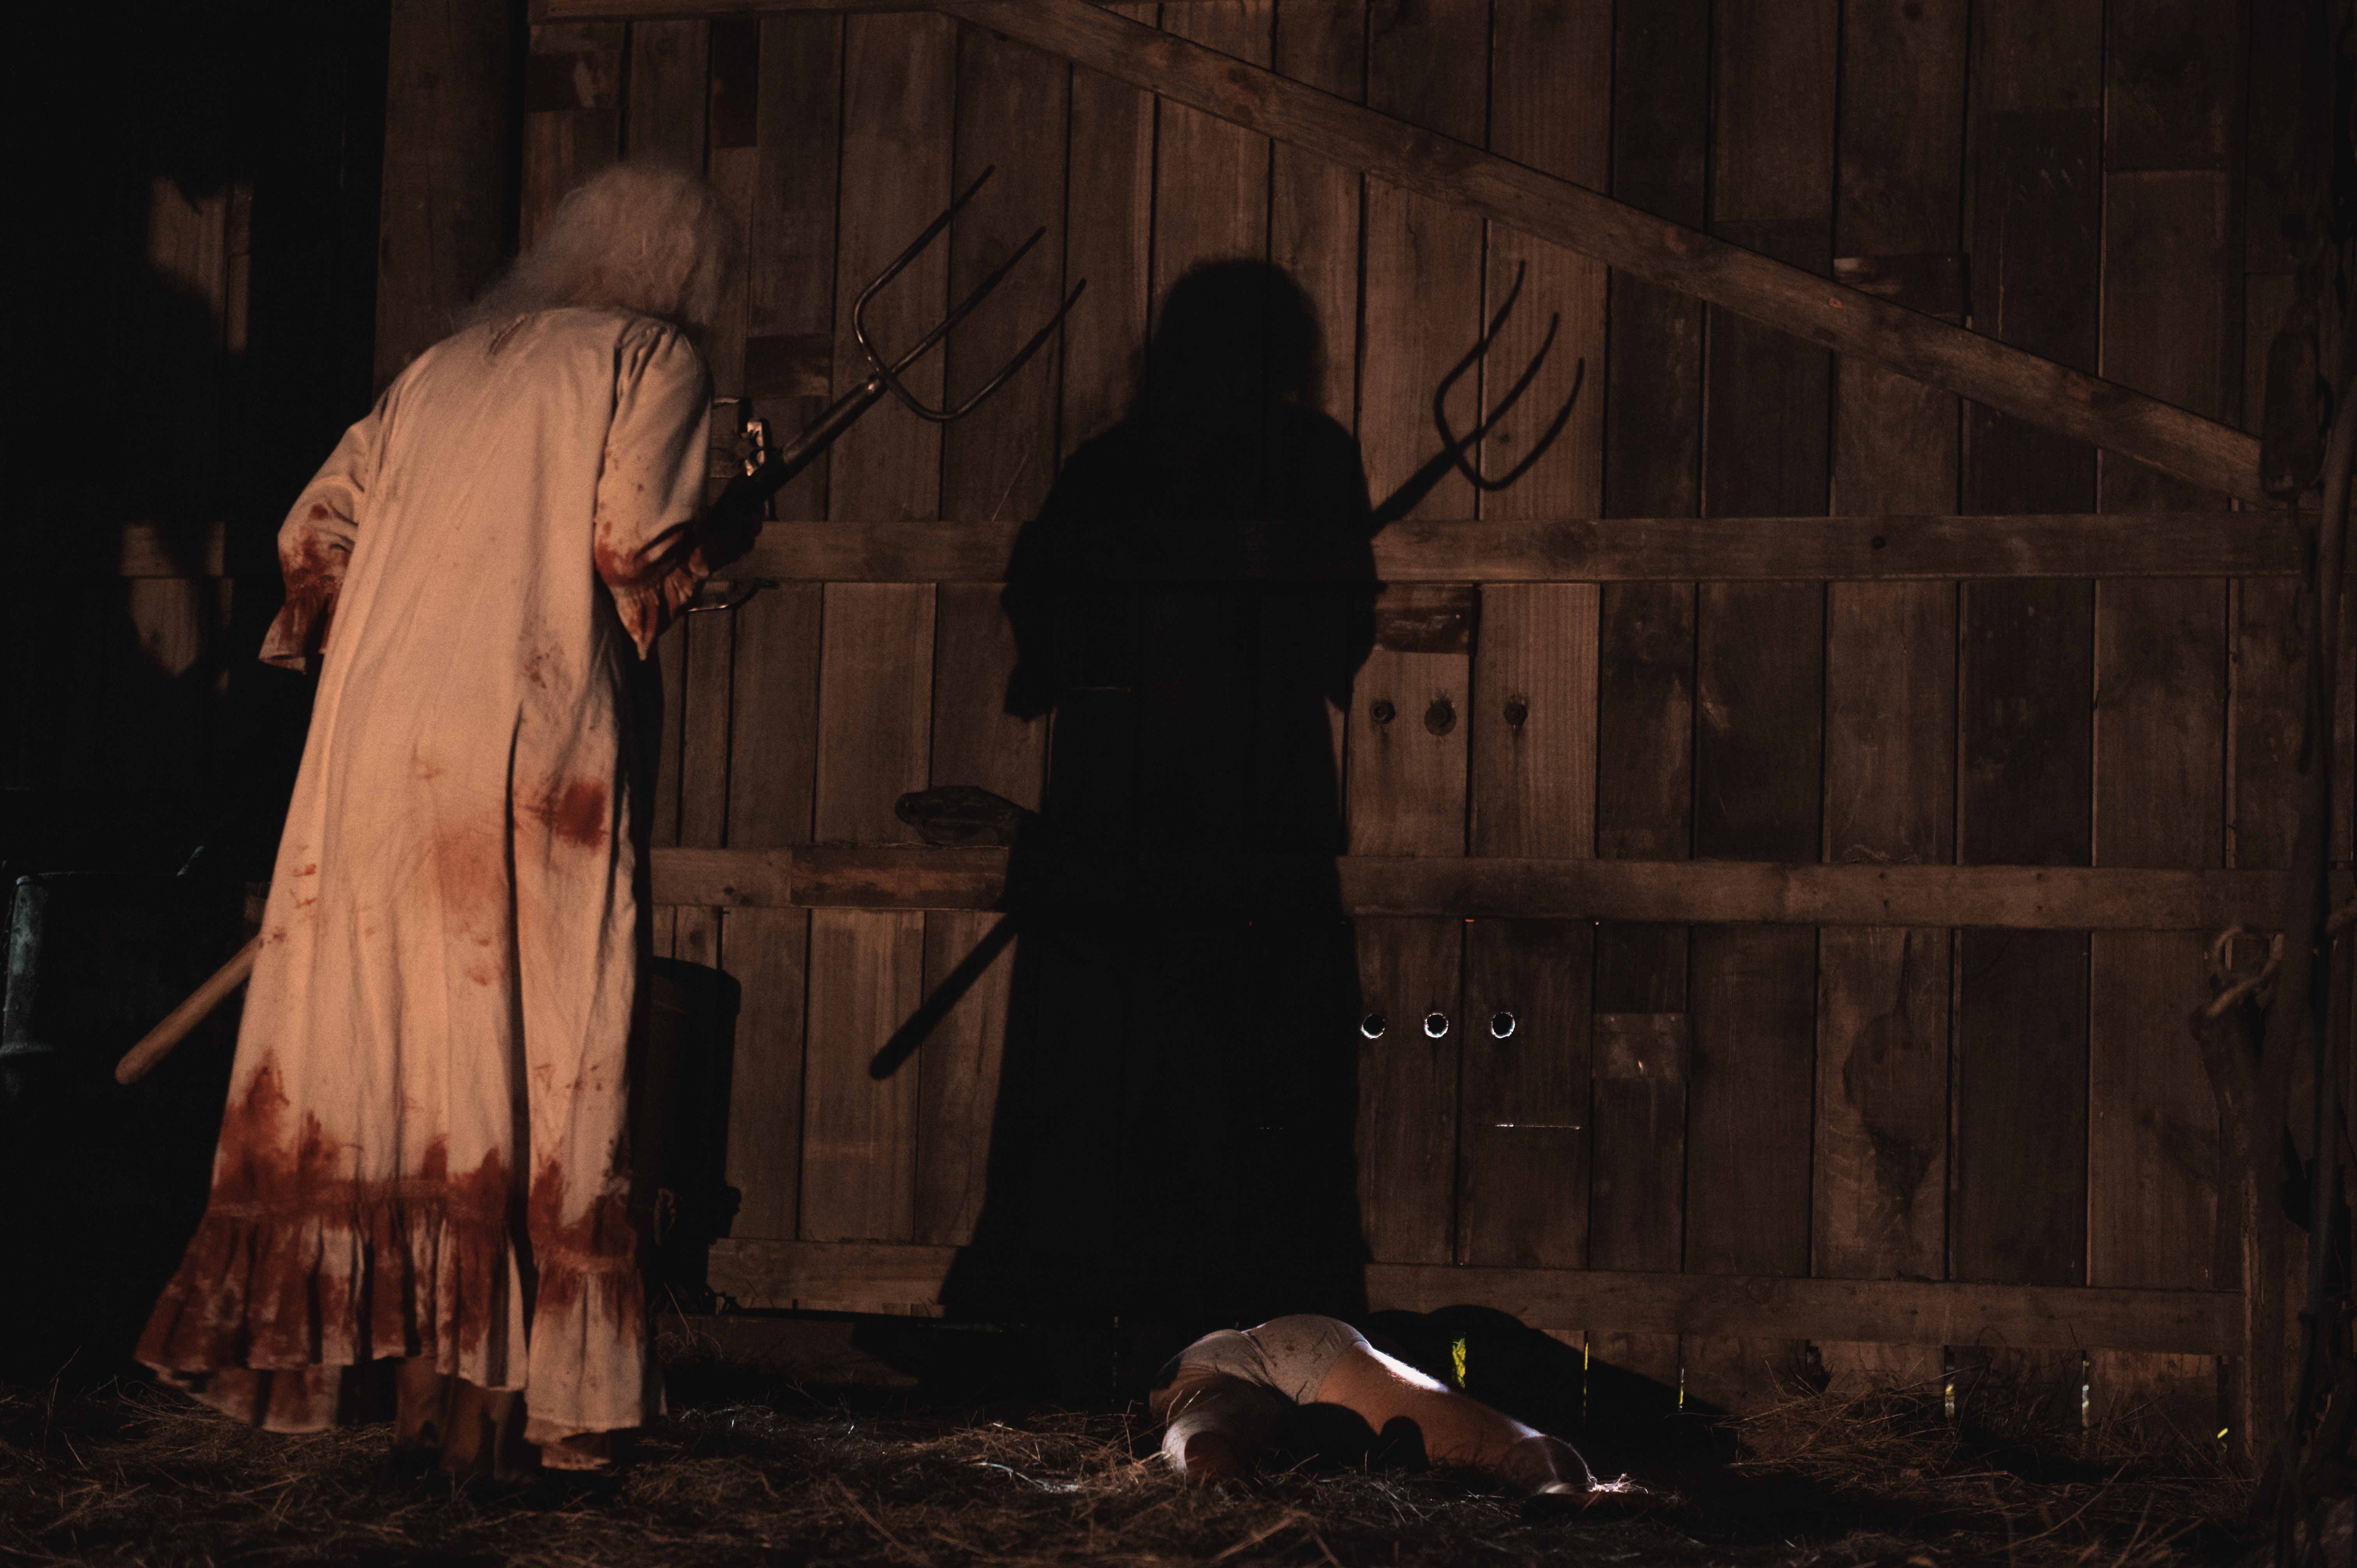 A dark-lit, creepy scene shows an old woman with long white hair in a long white dress with bloodstains covering it, hunched over and holding a pitchfork, her shadow cast on a wooden barn wall in front of her.